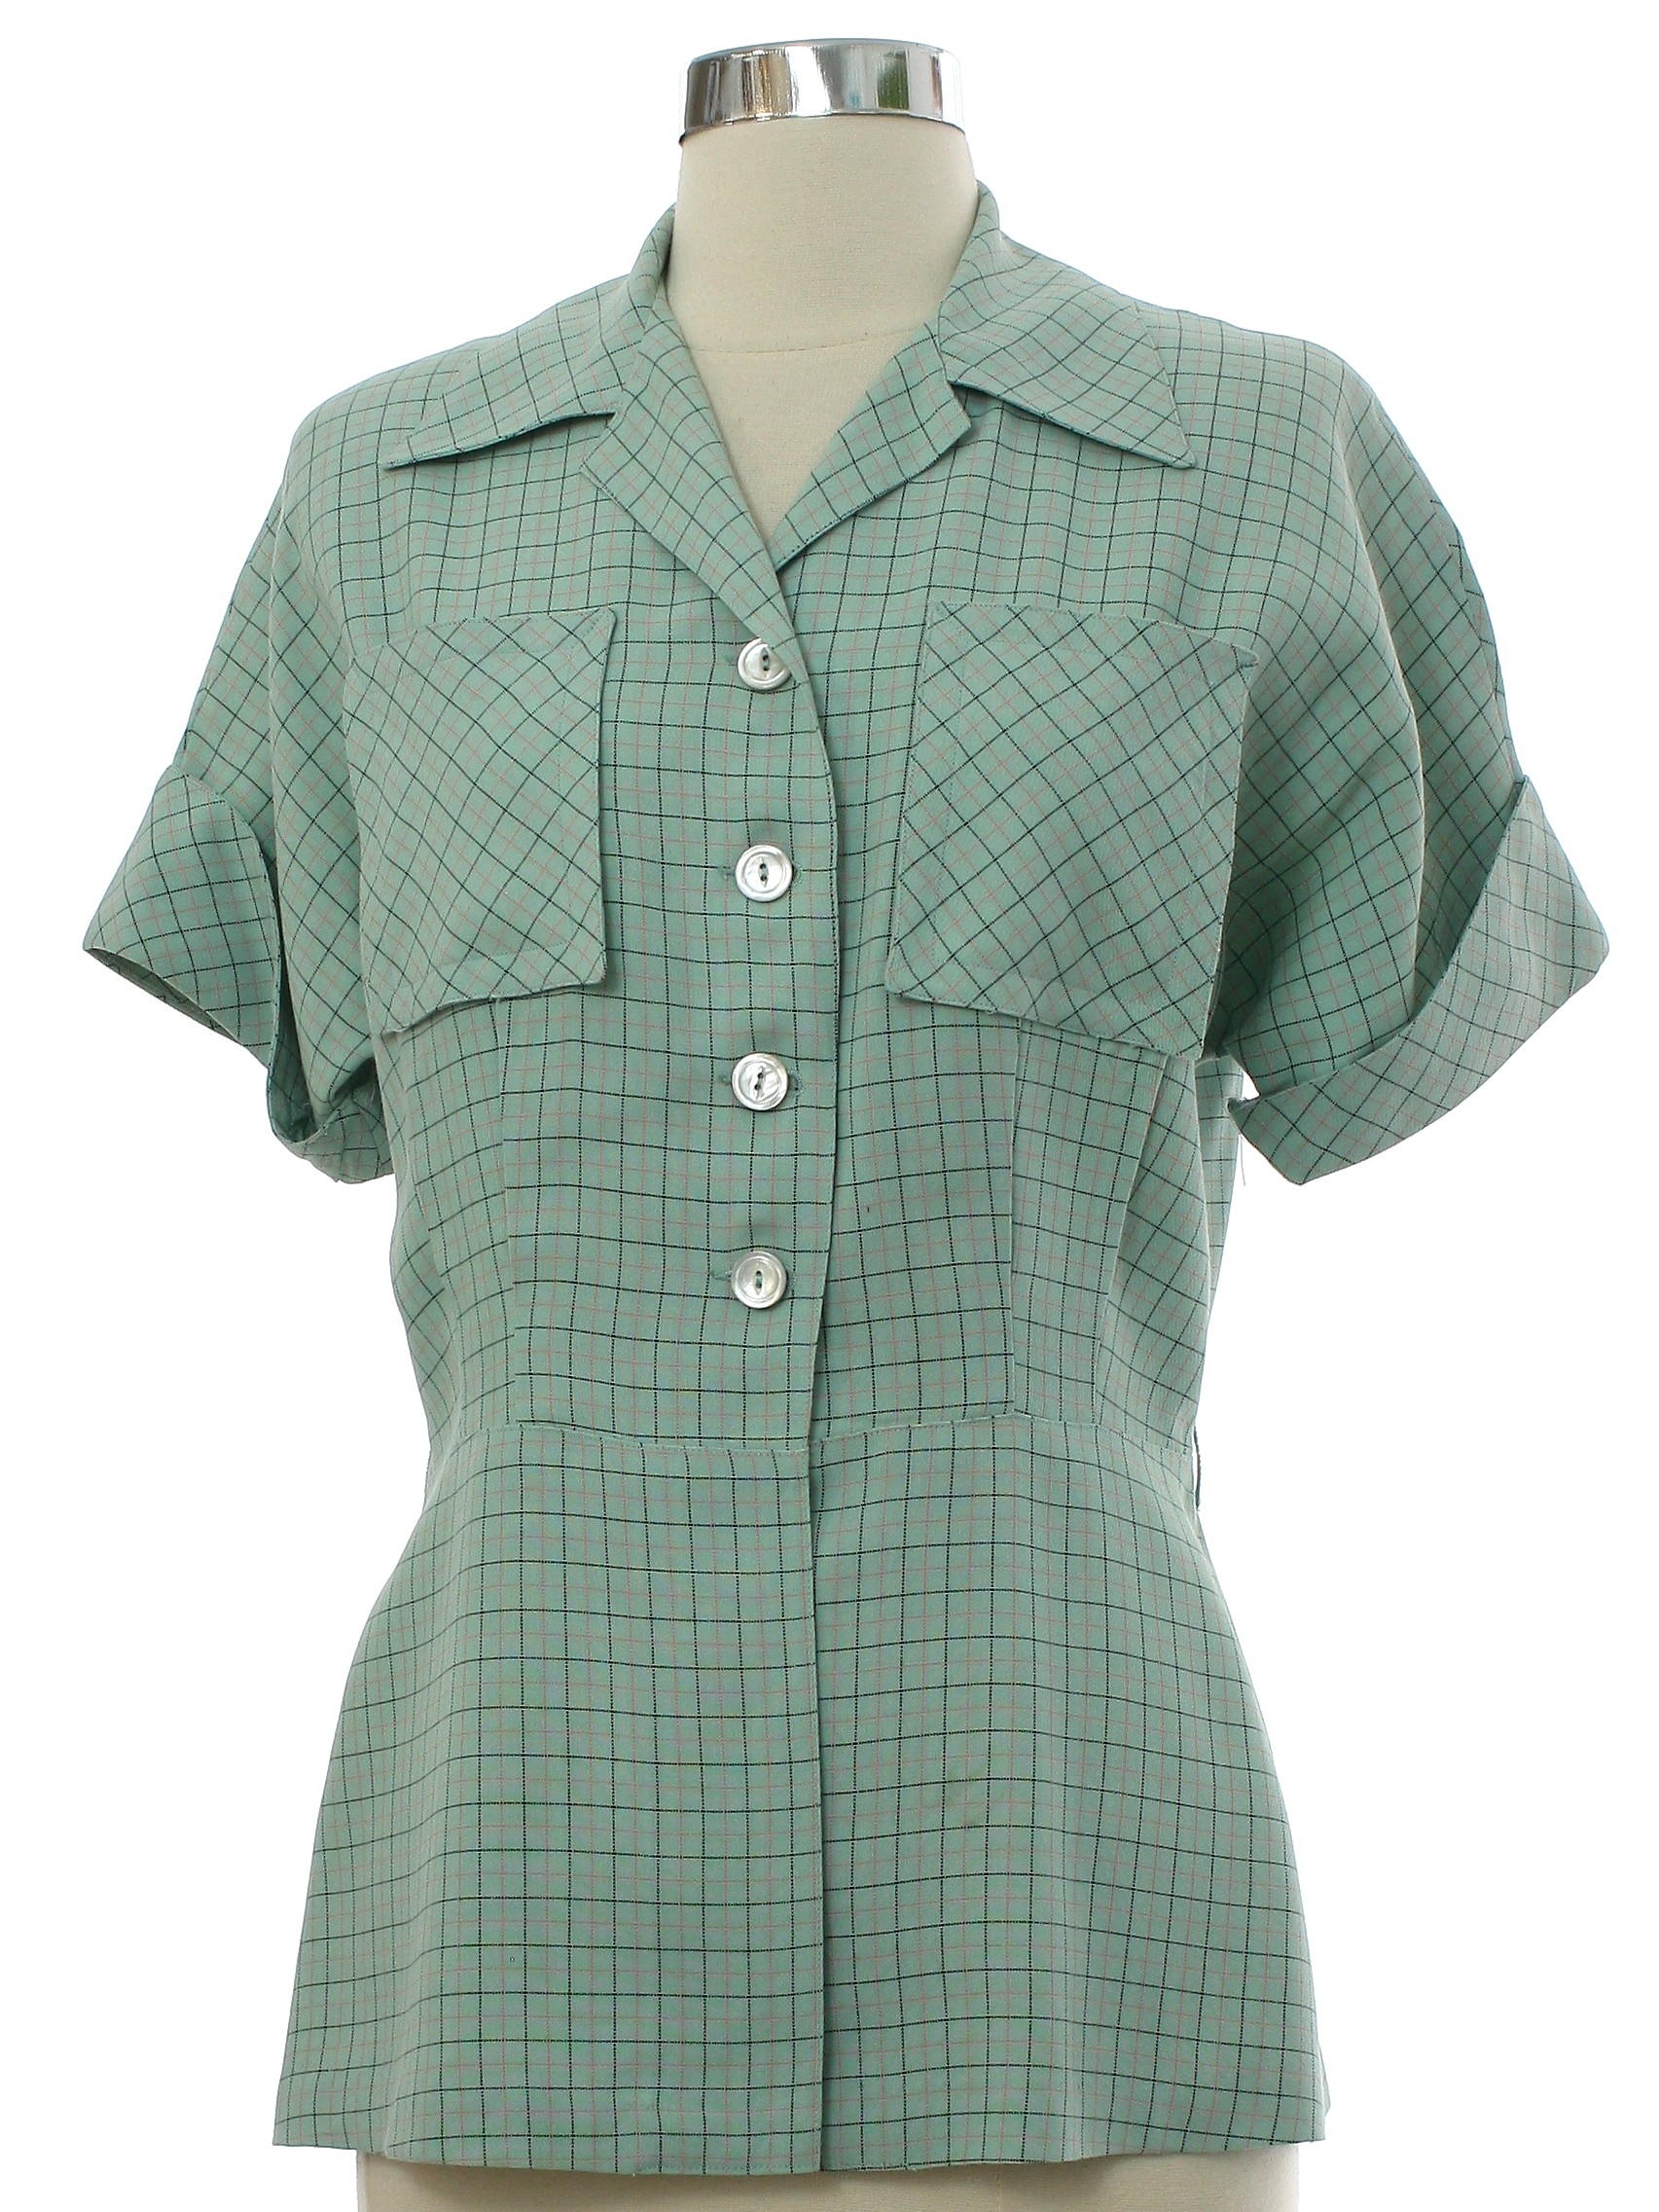 1940's Retro Gabardine Shirt: 40s style (likely made in the 50s ...